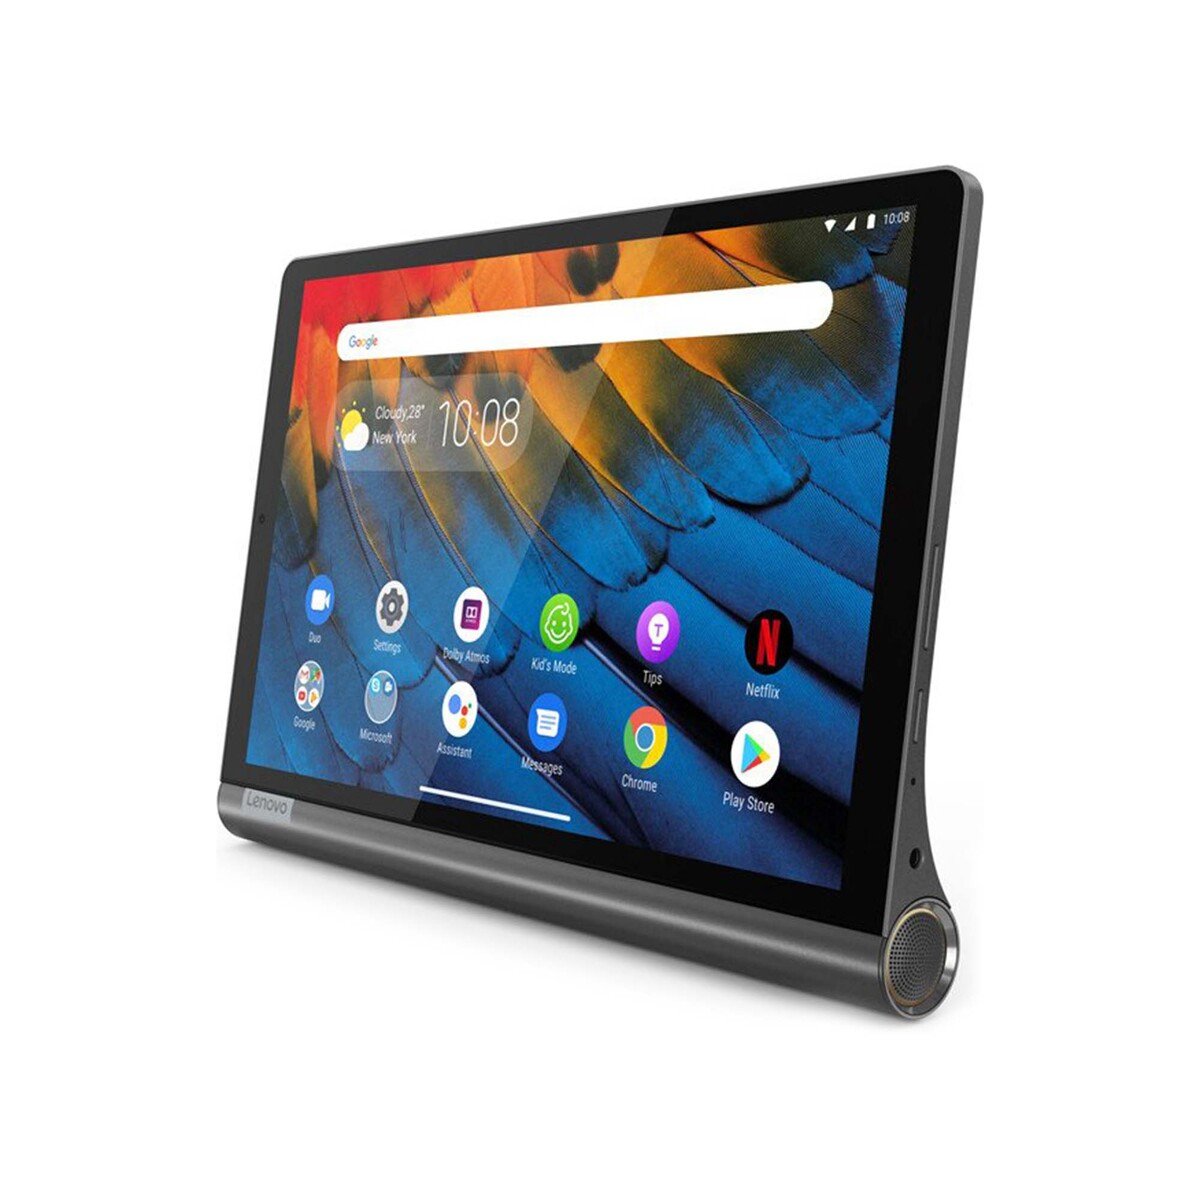 Lenovo Yoga Tablet YT-X705F, Octa-core, 3GB RAM, 32GB Memory, WiFi, 10.1 inches Display, Android 9 (Pie), Gray